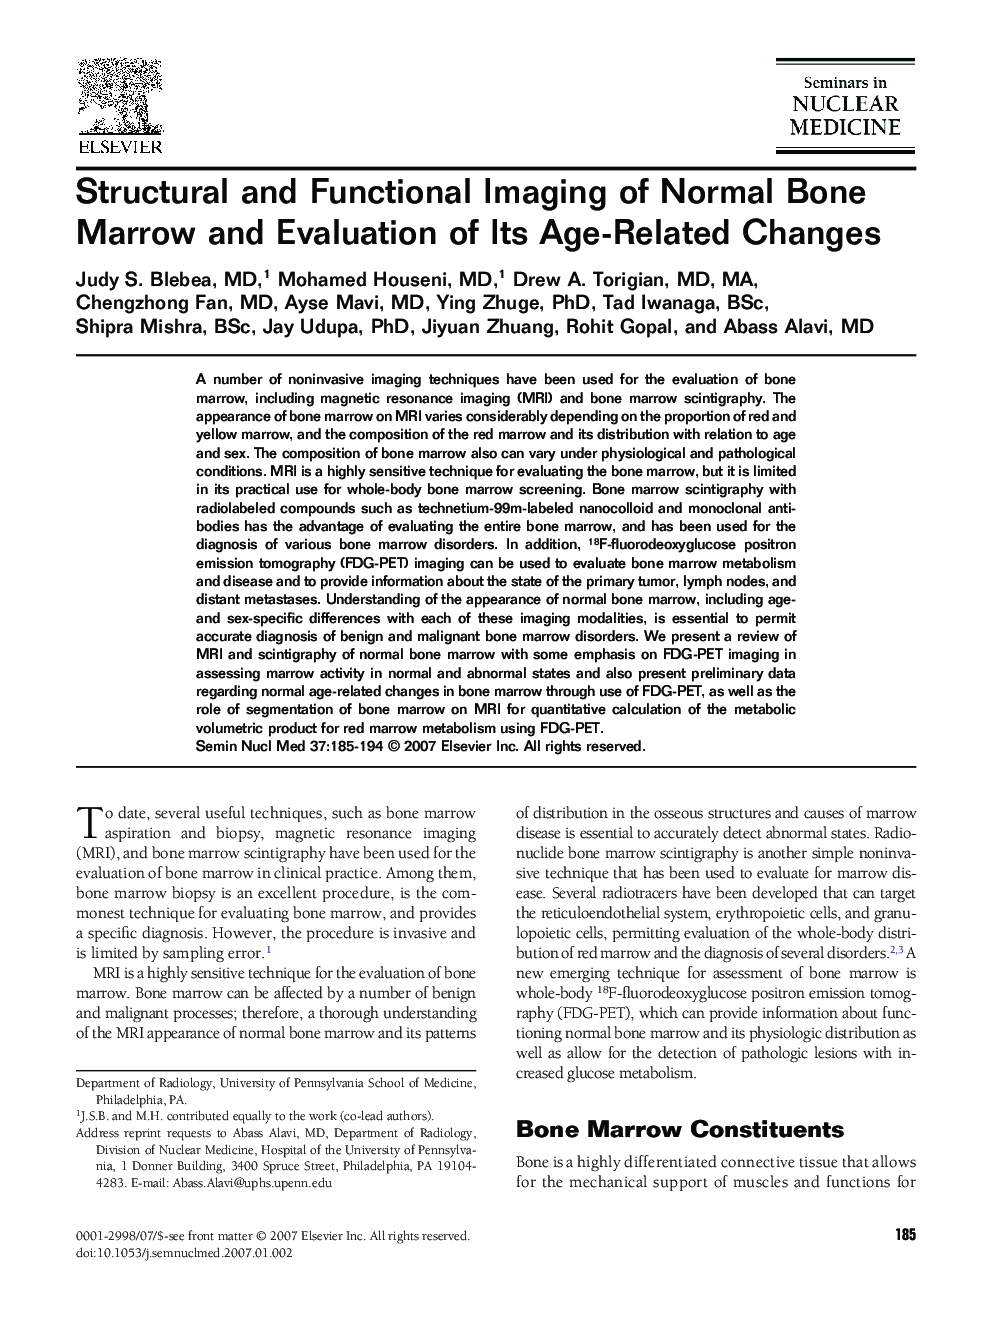 Structural and Functional Imaging of Normal Bone Marrow and Evaluation of Its Age-Related Changes